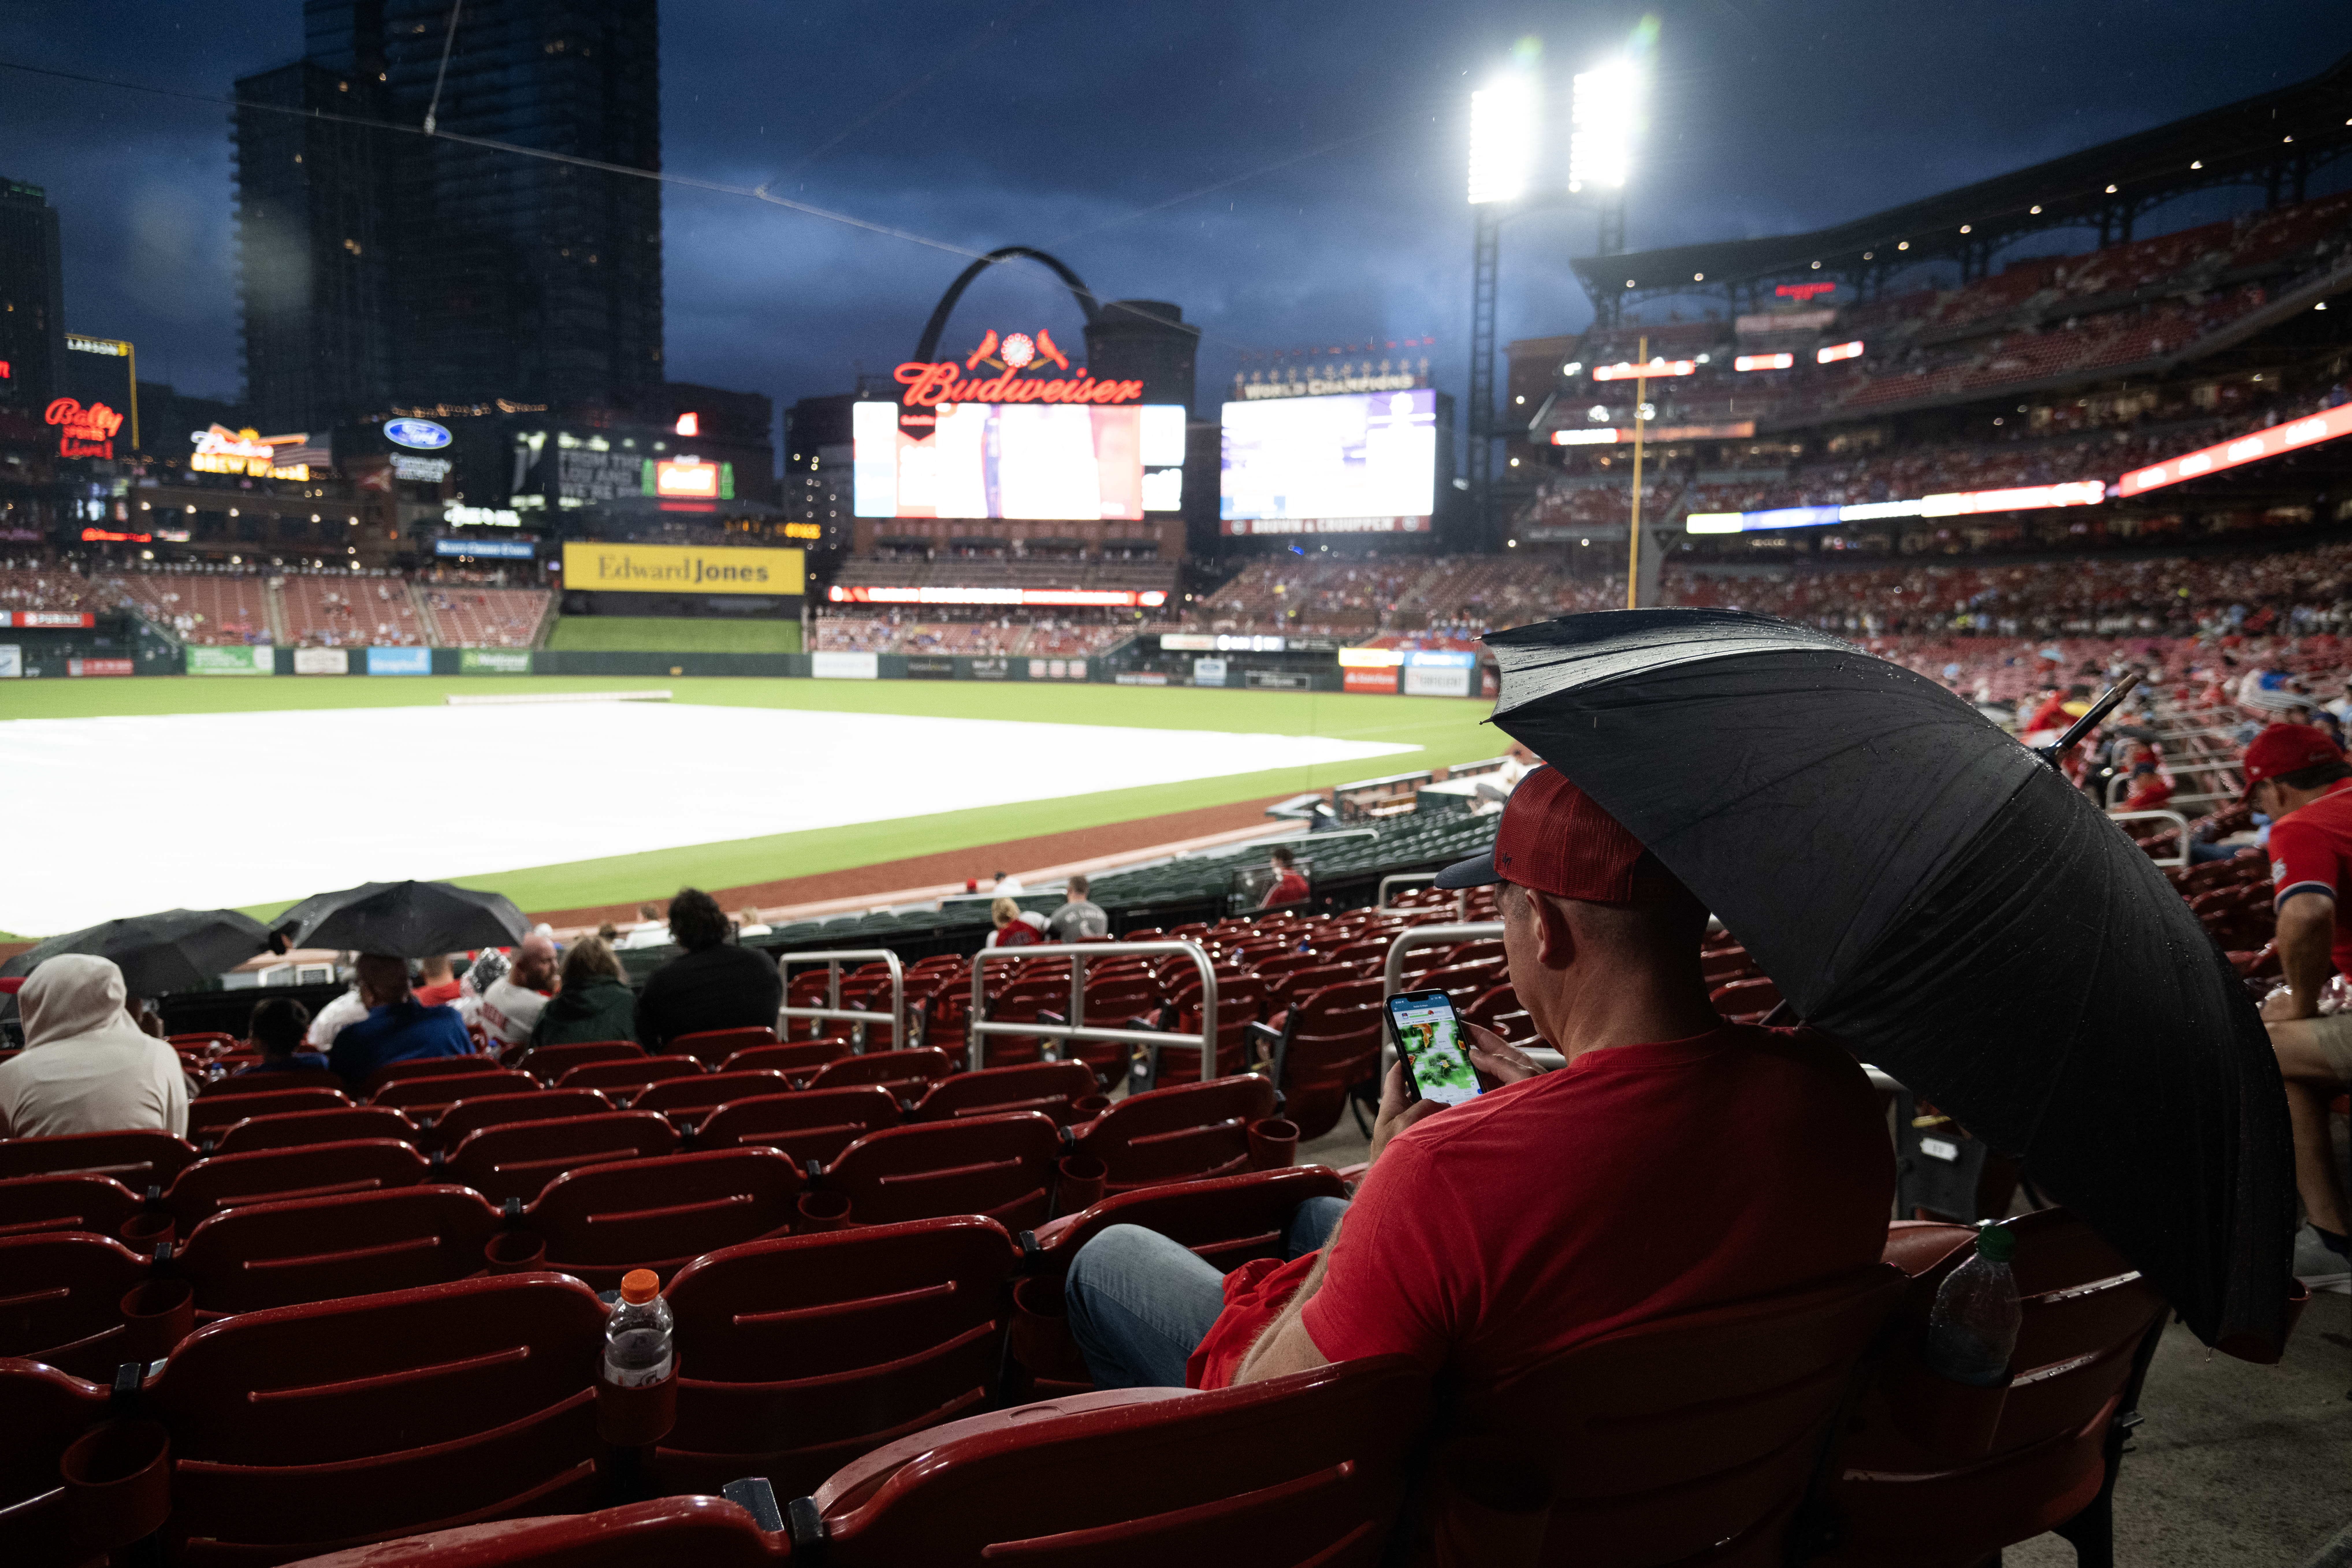 Friday's Cubs-Cardinals game is postponed. Here's everything we know